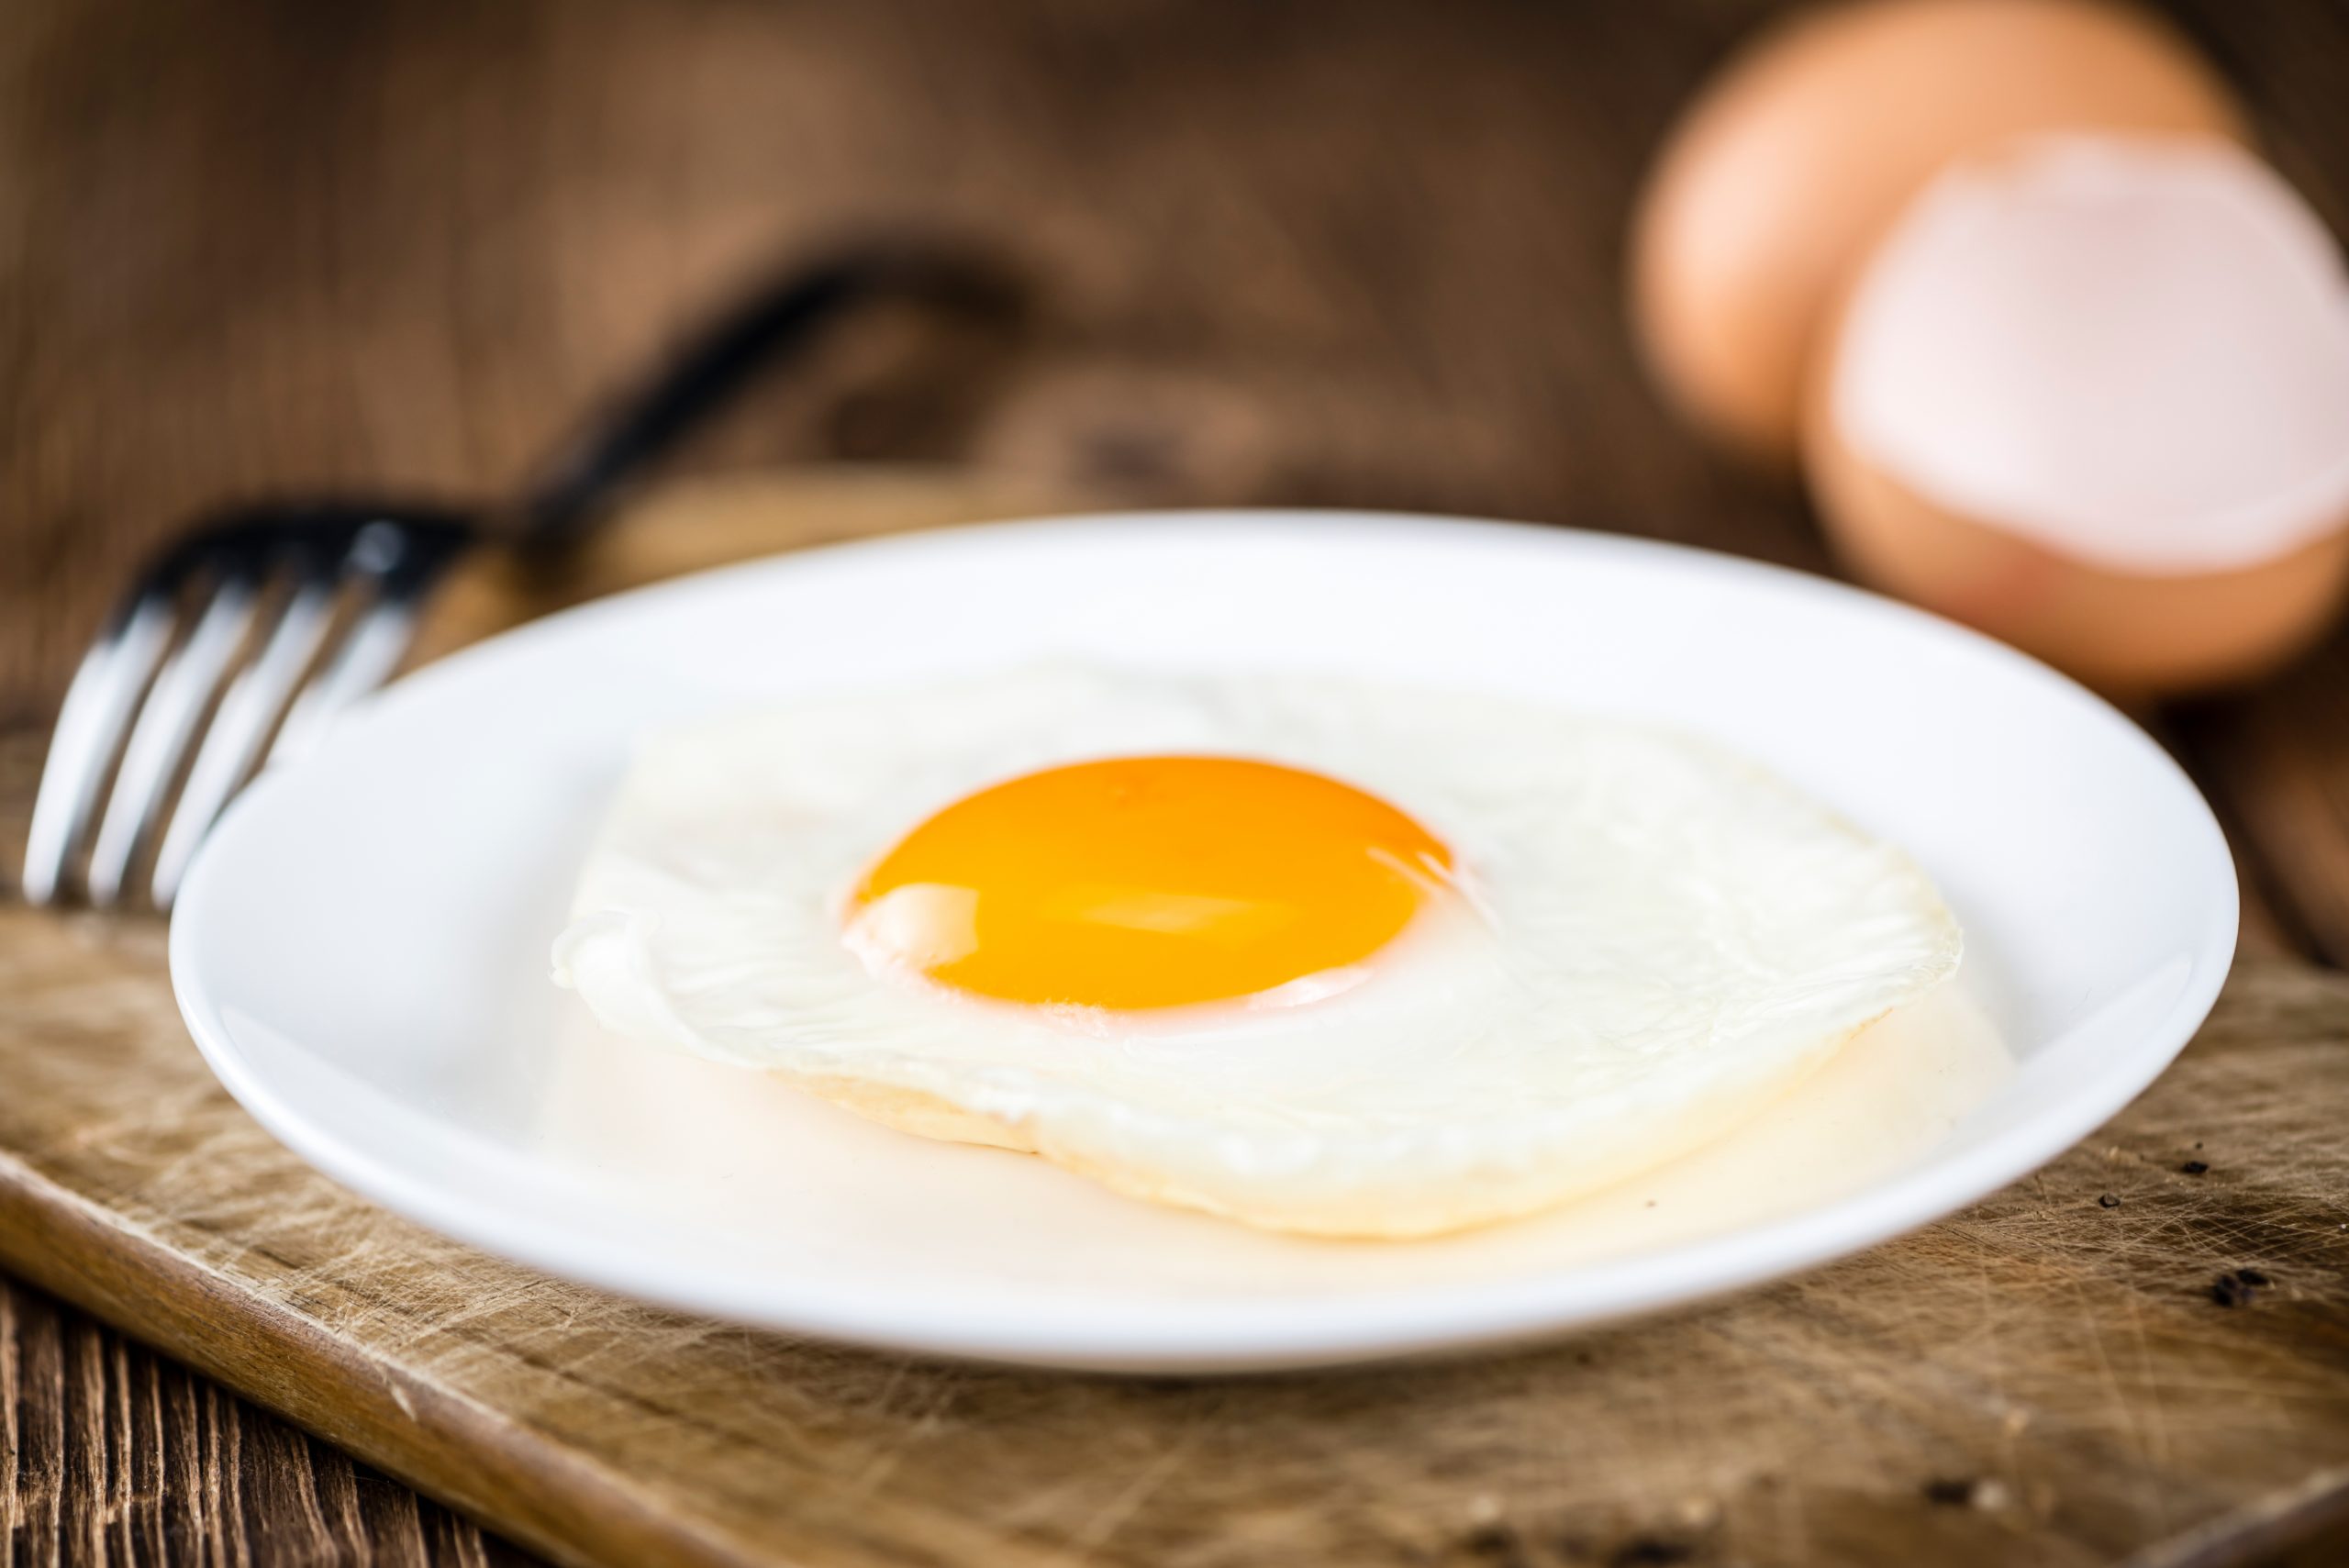 An egg sits on a plate.